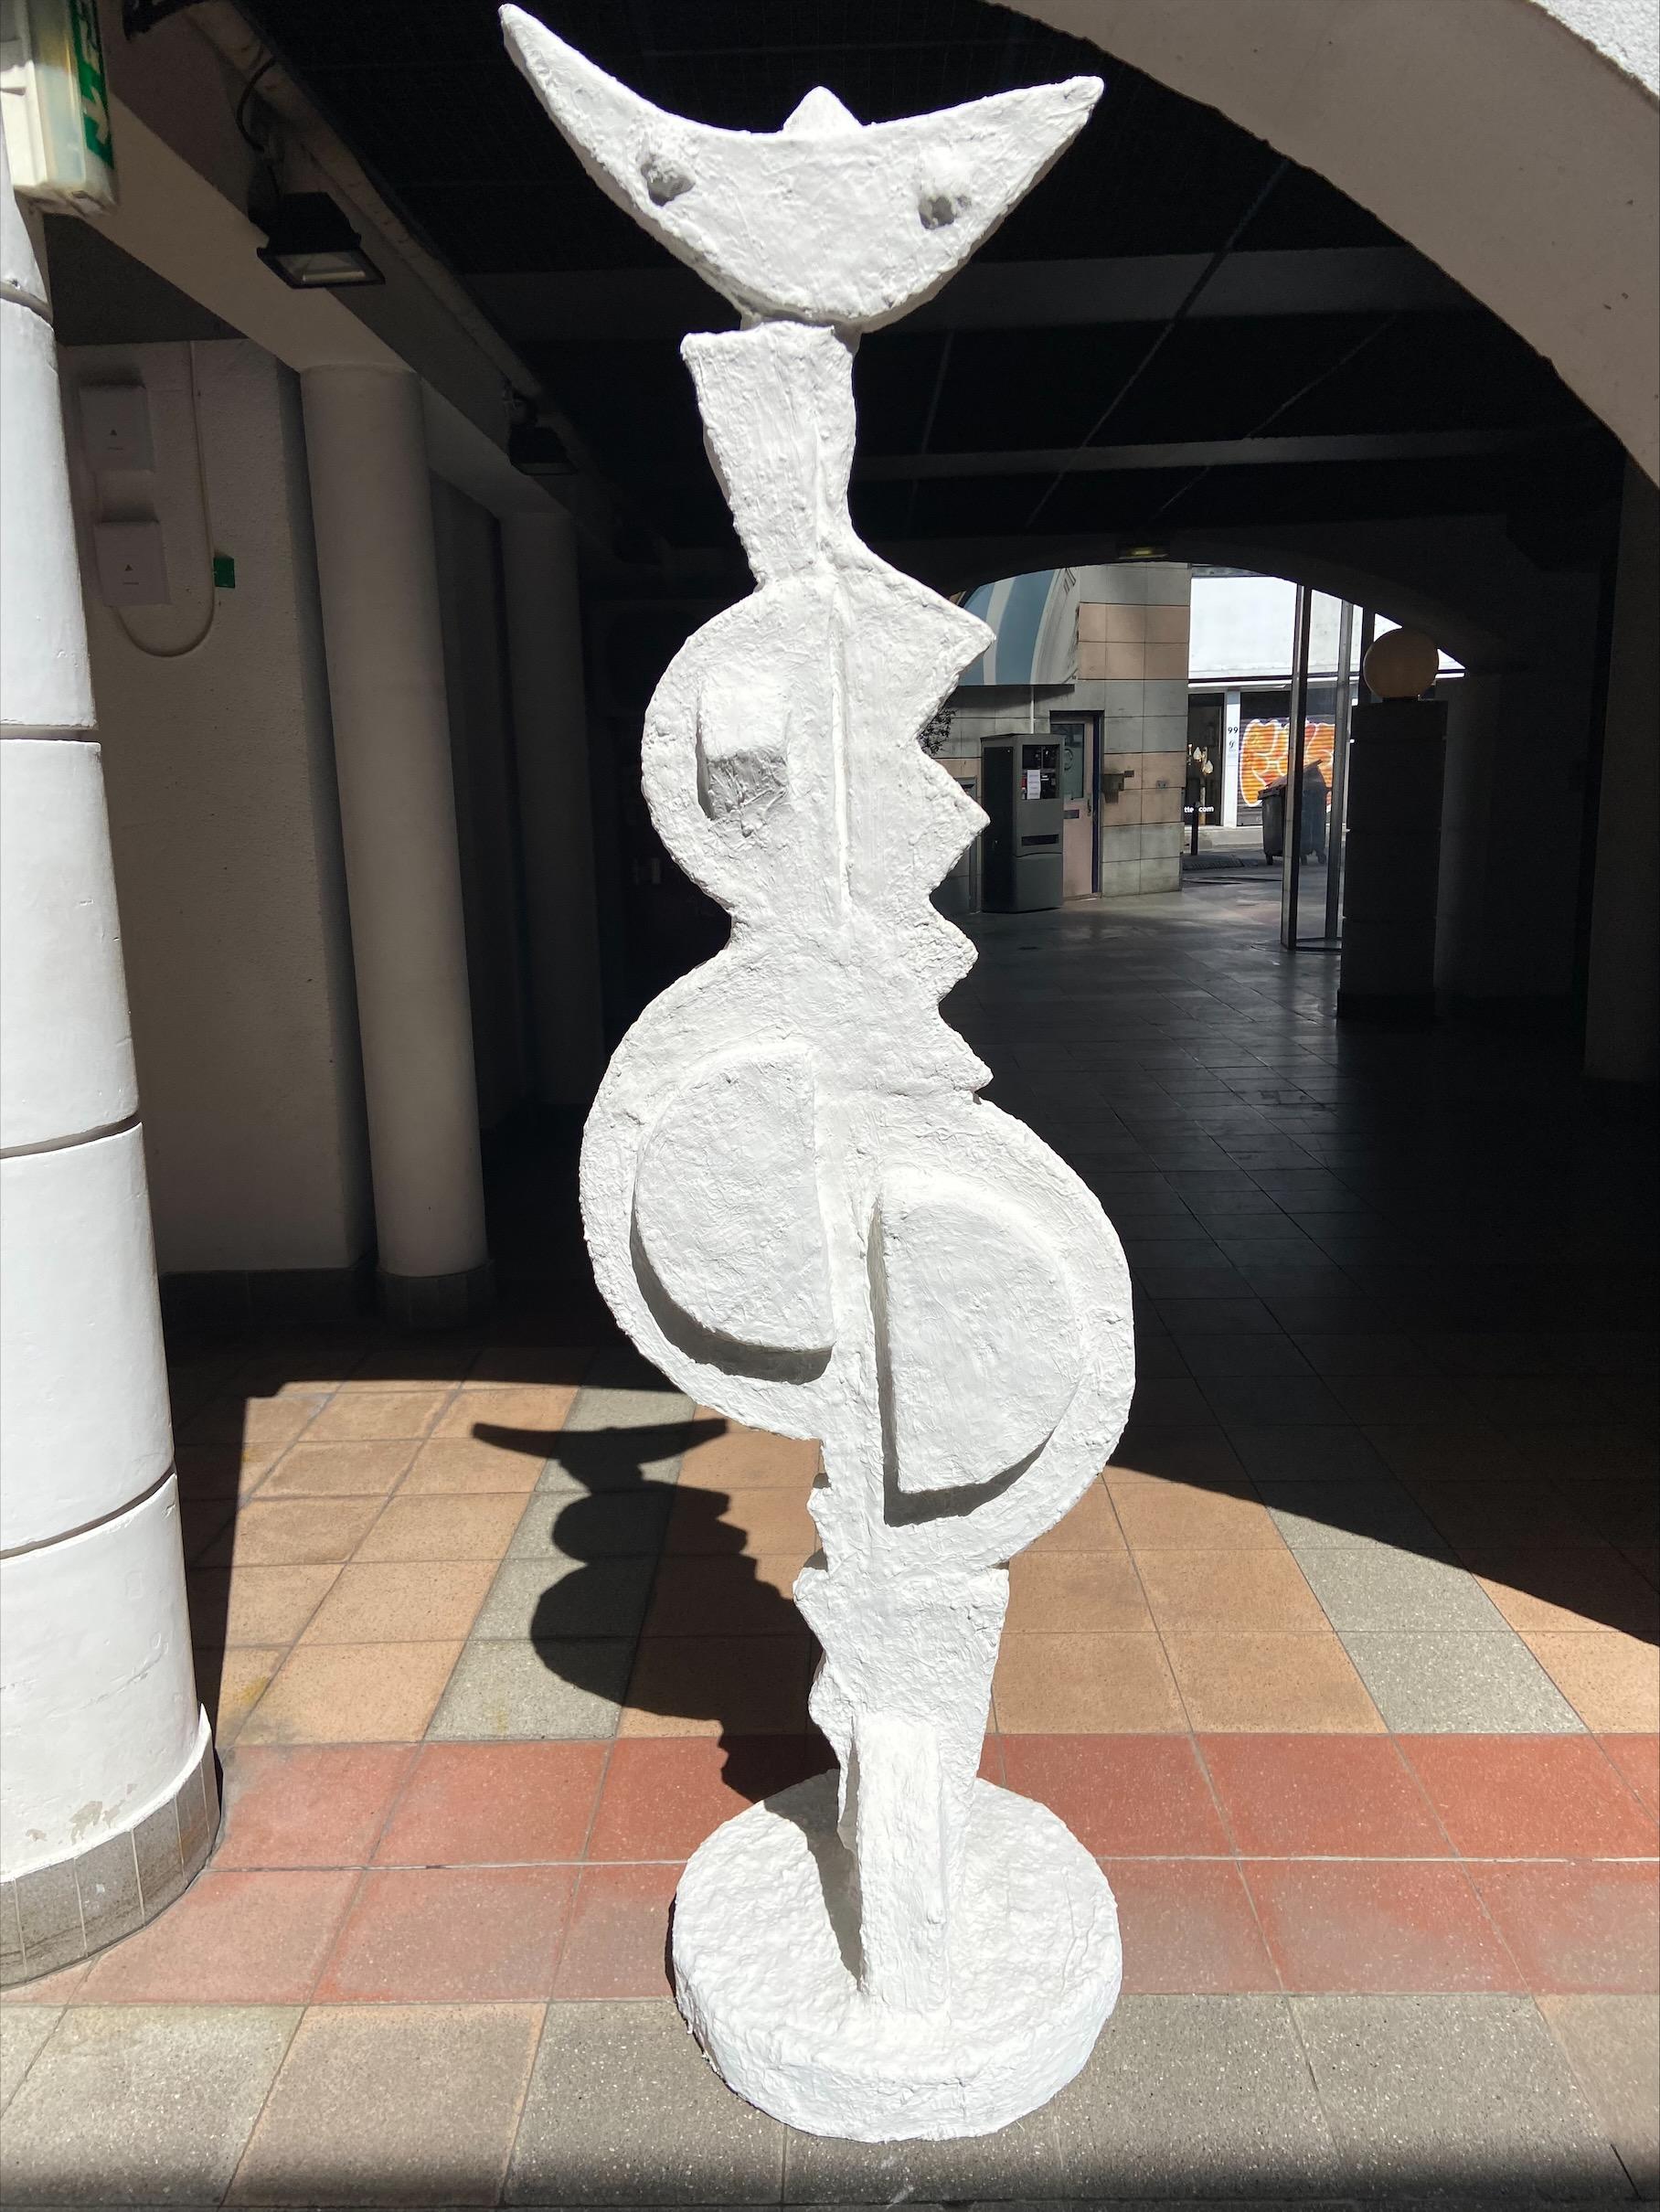 Sculpture Totem tribute to Miro - Philippe Valentin
Resin plaster
Signed on the back
Measures: H 224 x W 65 x D 60cm
Circa 2020
In a perfect state
The Philippe Valentin workshop has its roots in the south of France. These contemporary